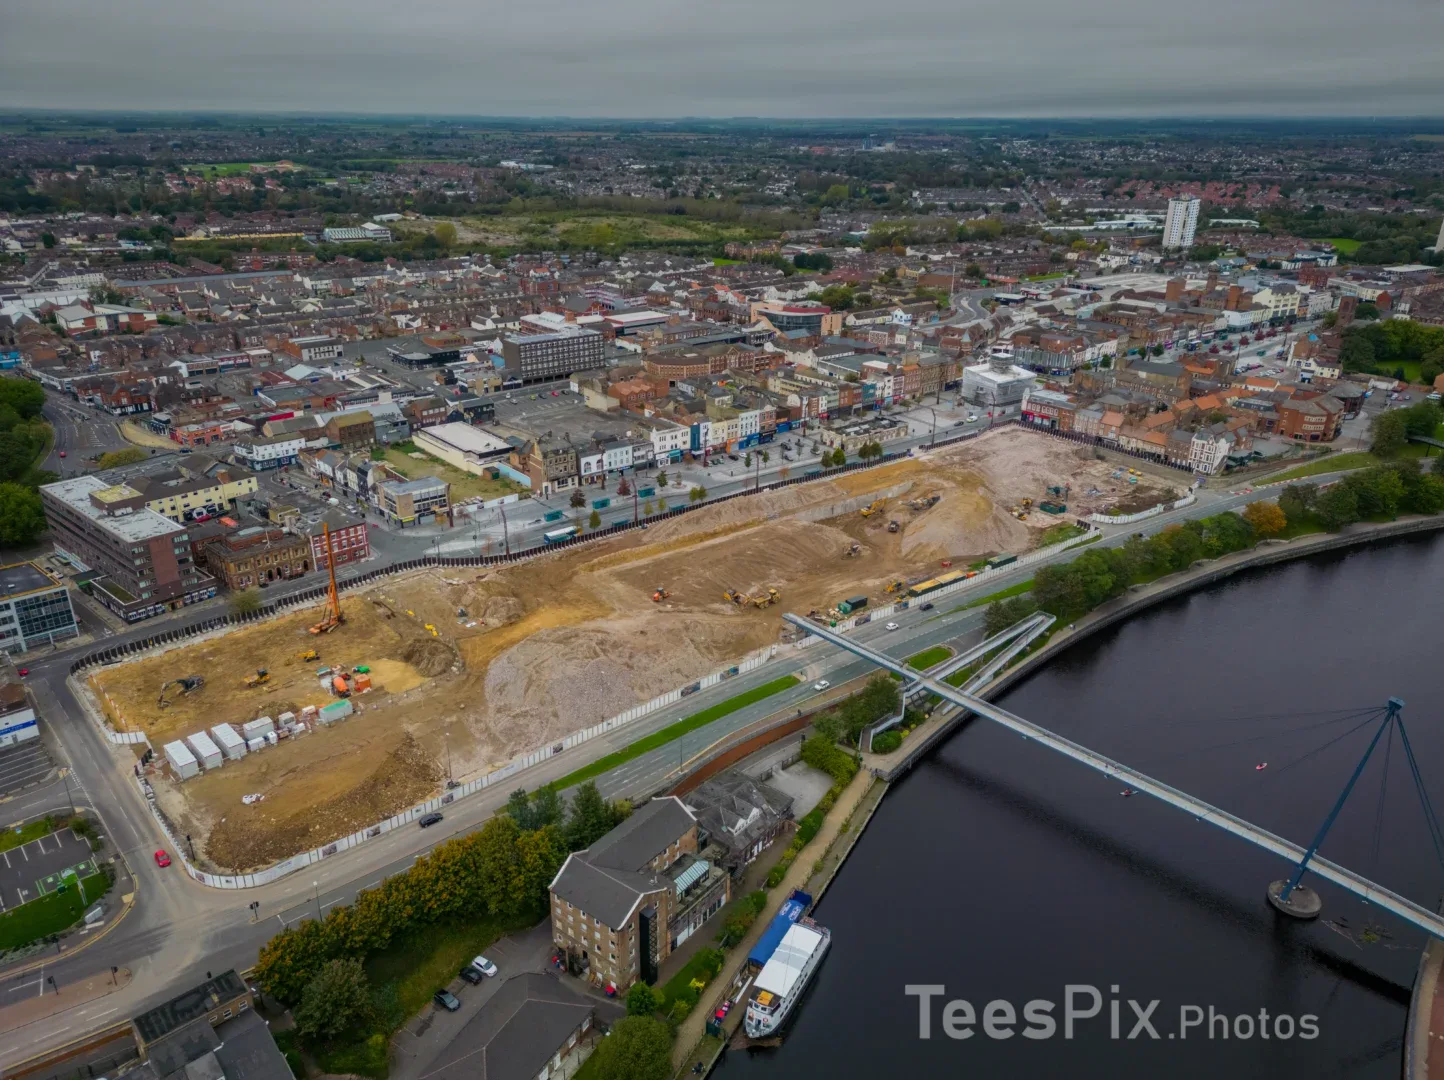 Stockton Waterfront site cleared of the former Castlegate Shopping Centre